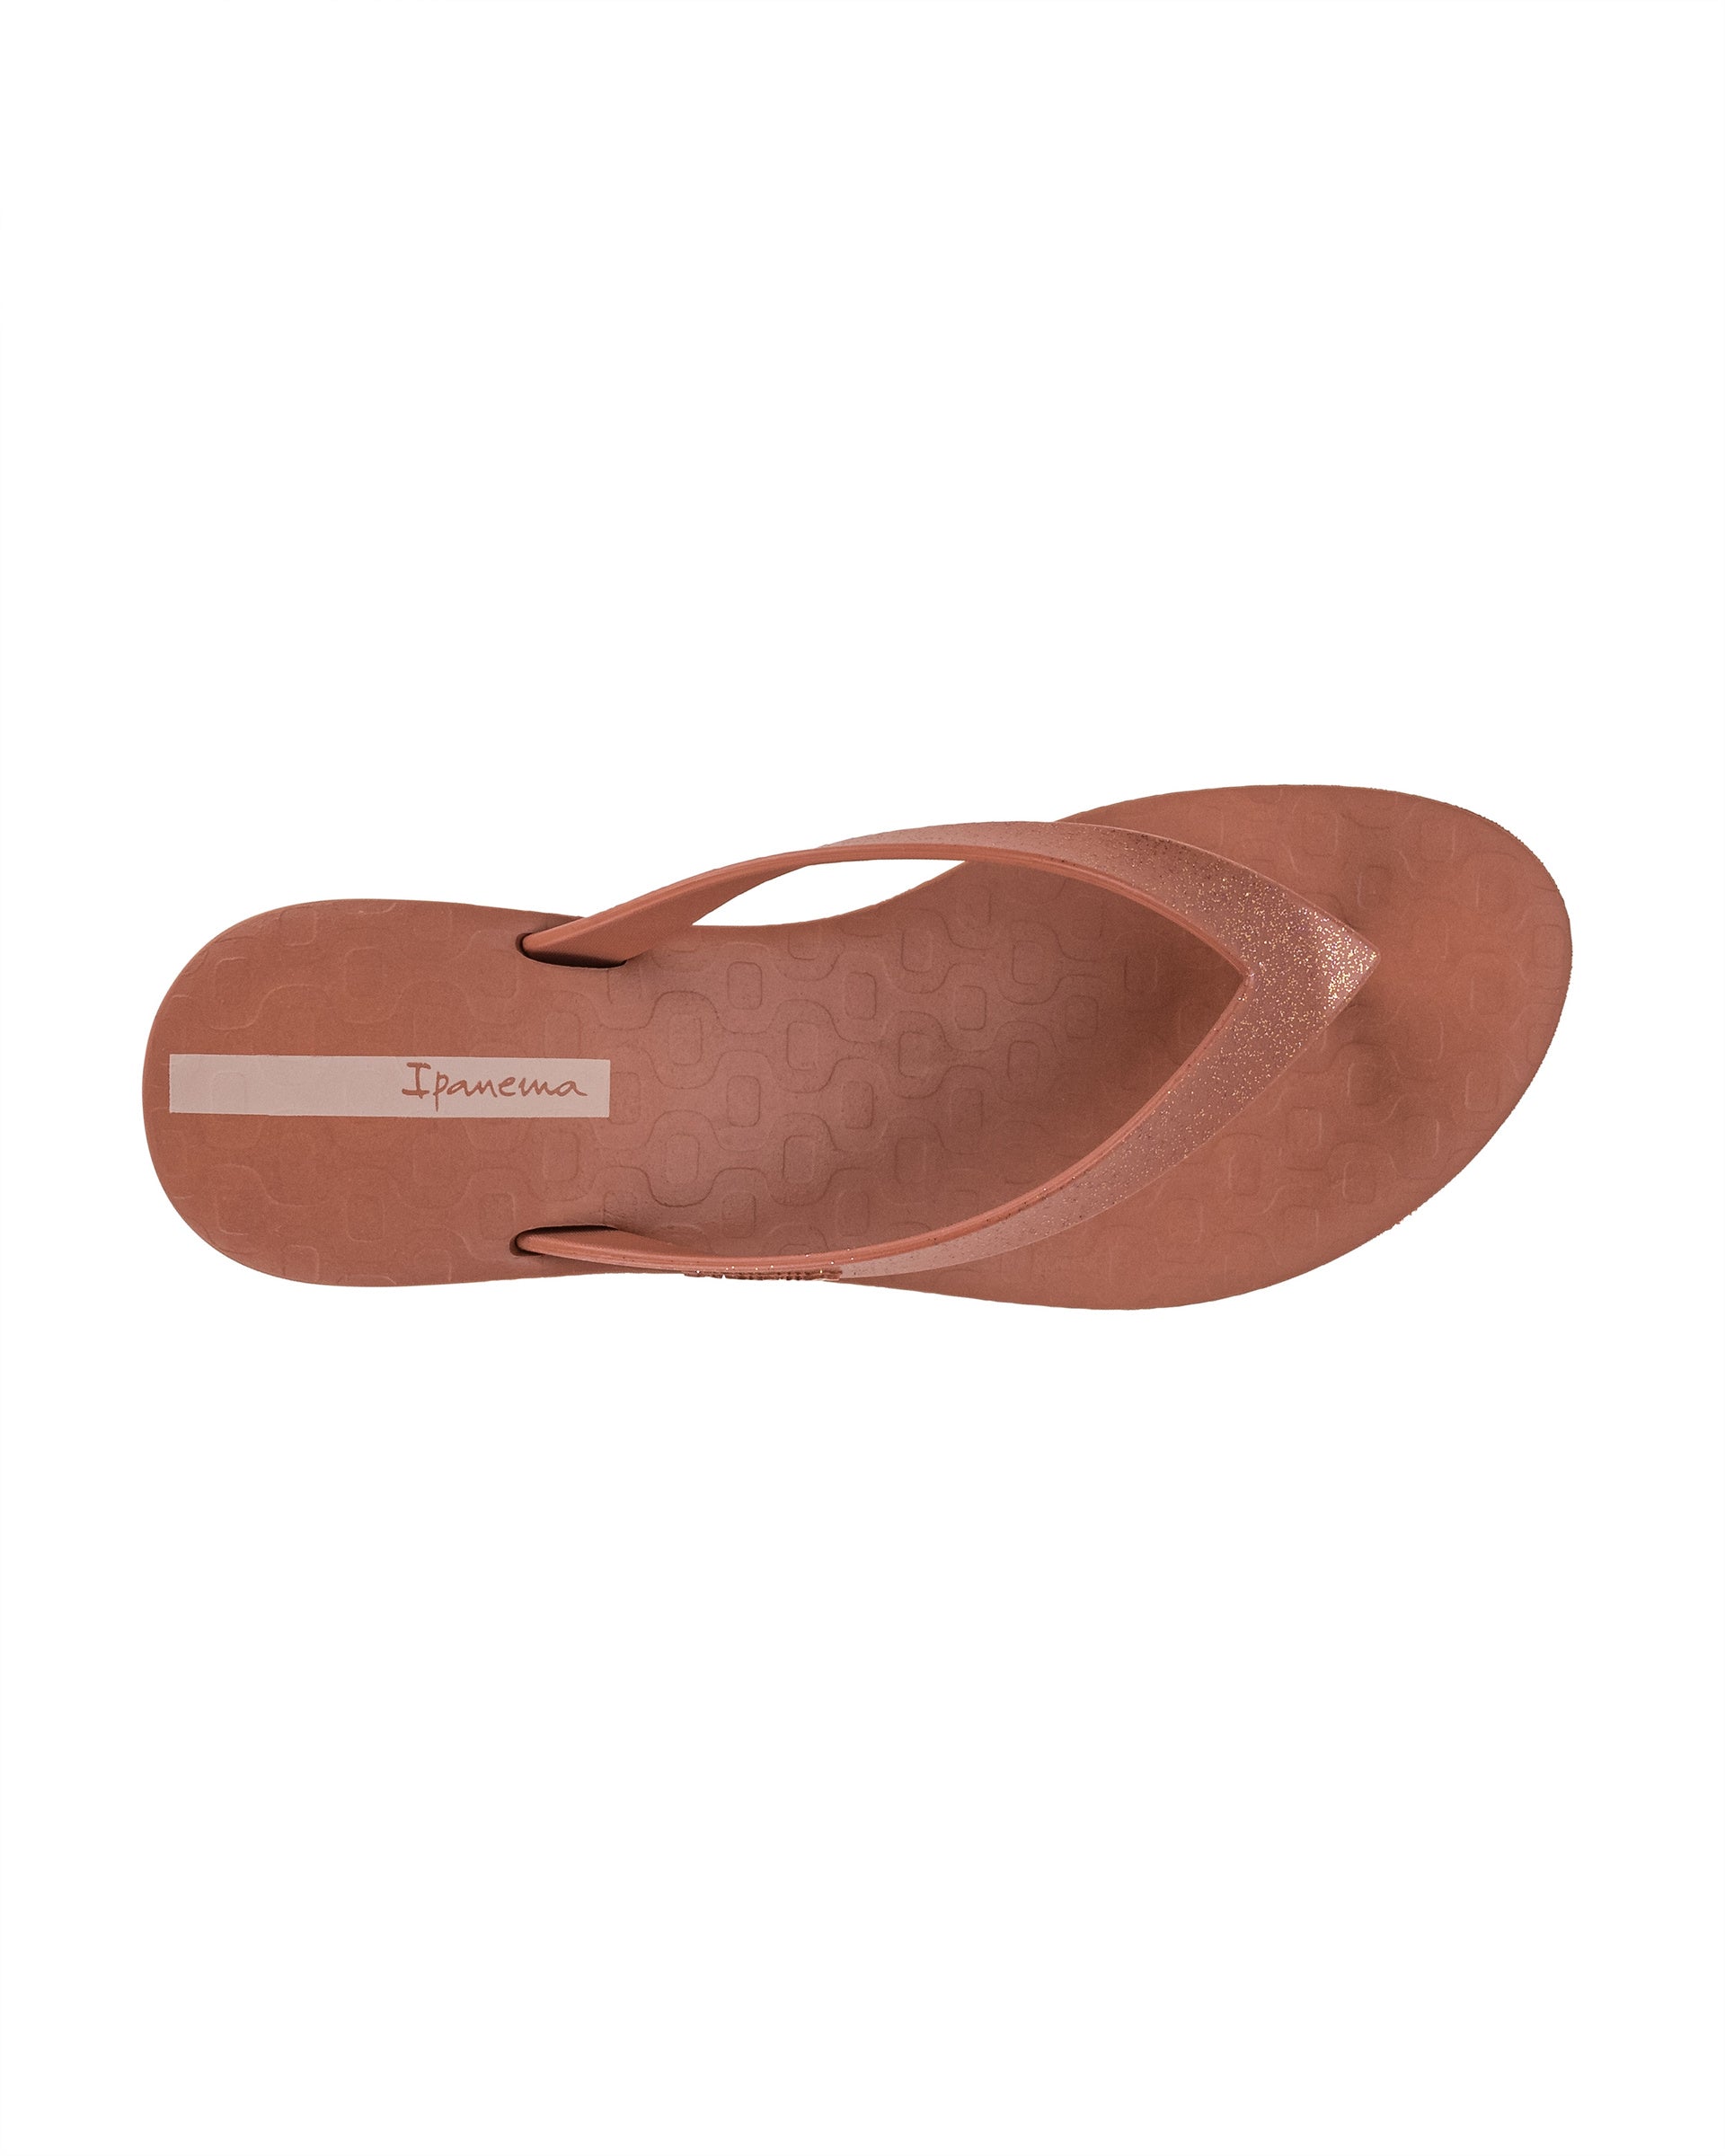 Top view of a pink Ipanema Selfie women's wedge flip flop with glitter pink straps.